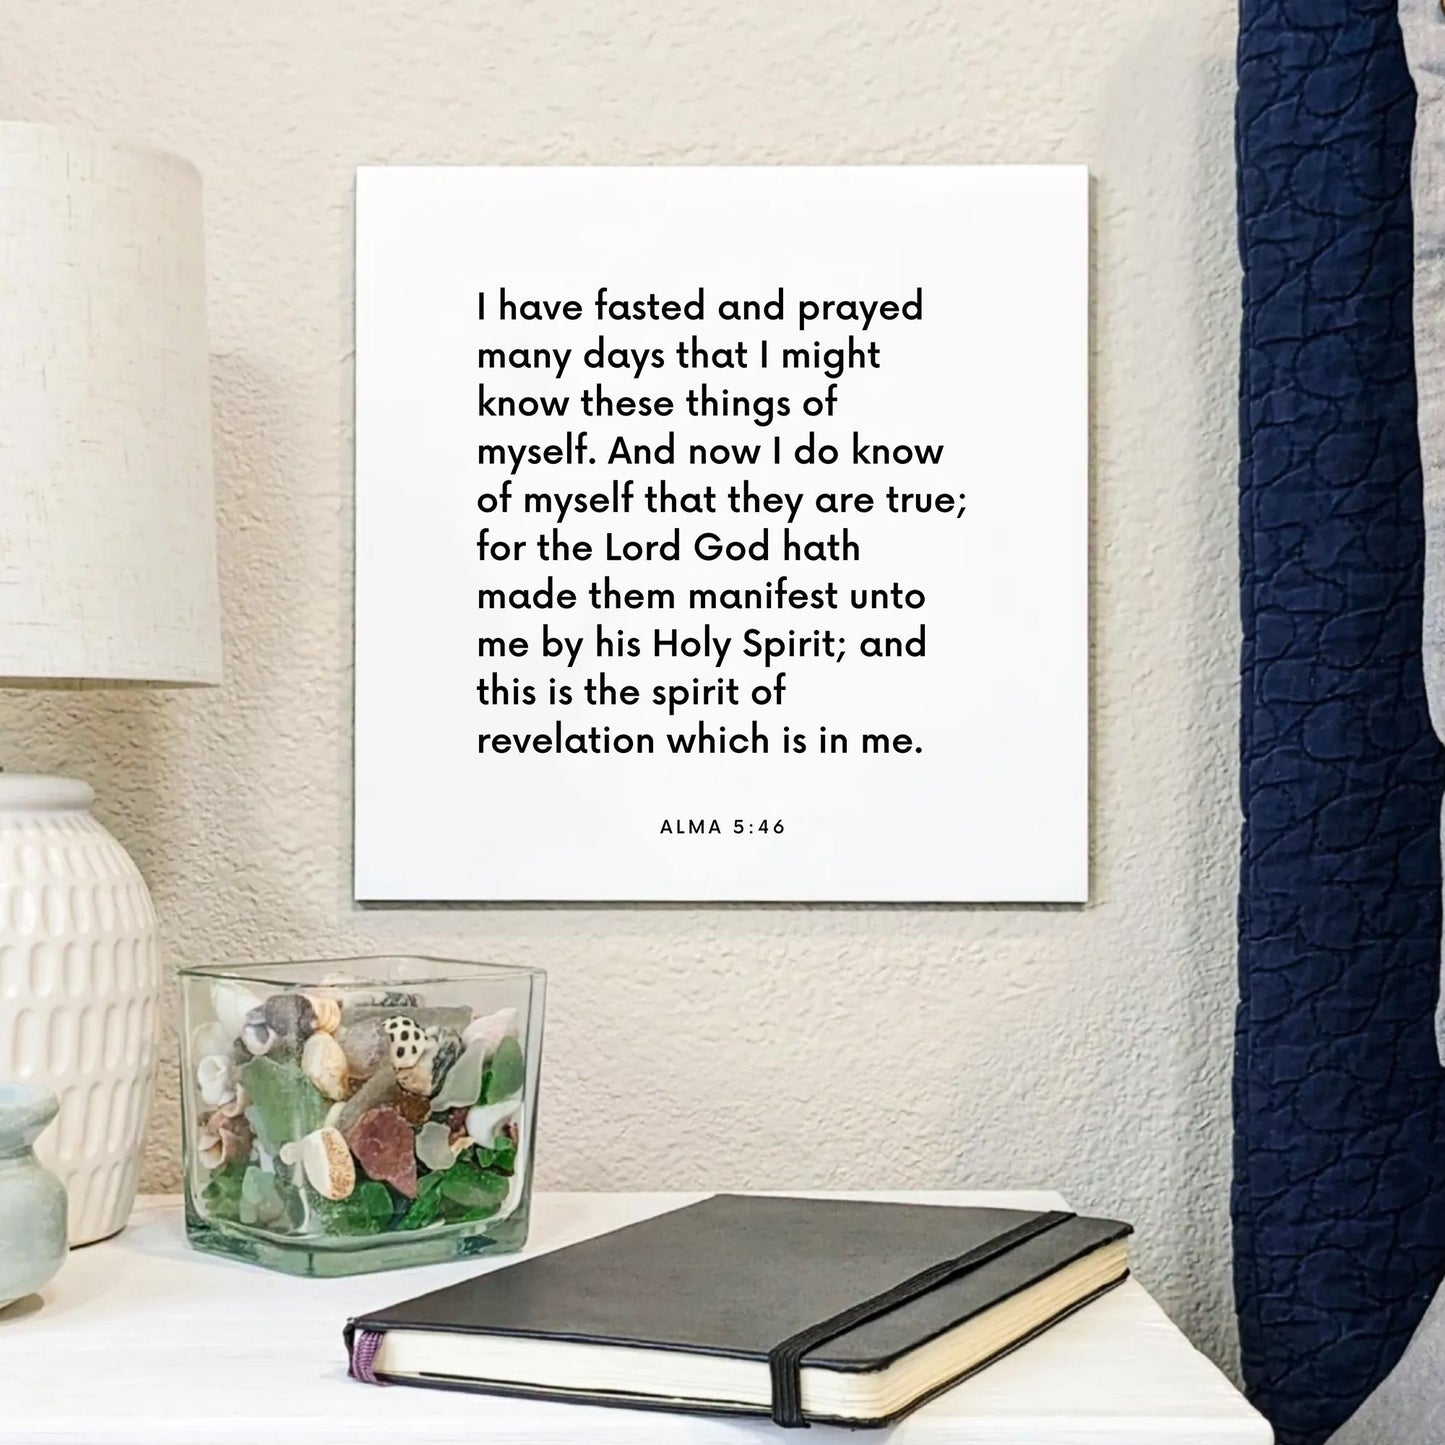 Bedside mouting of the scripture tile for Alma 5:46 - "I have fasted and prayed many days that I might know"